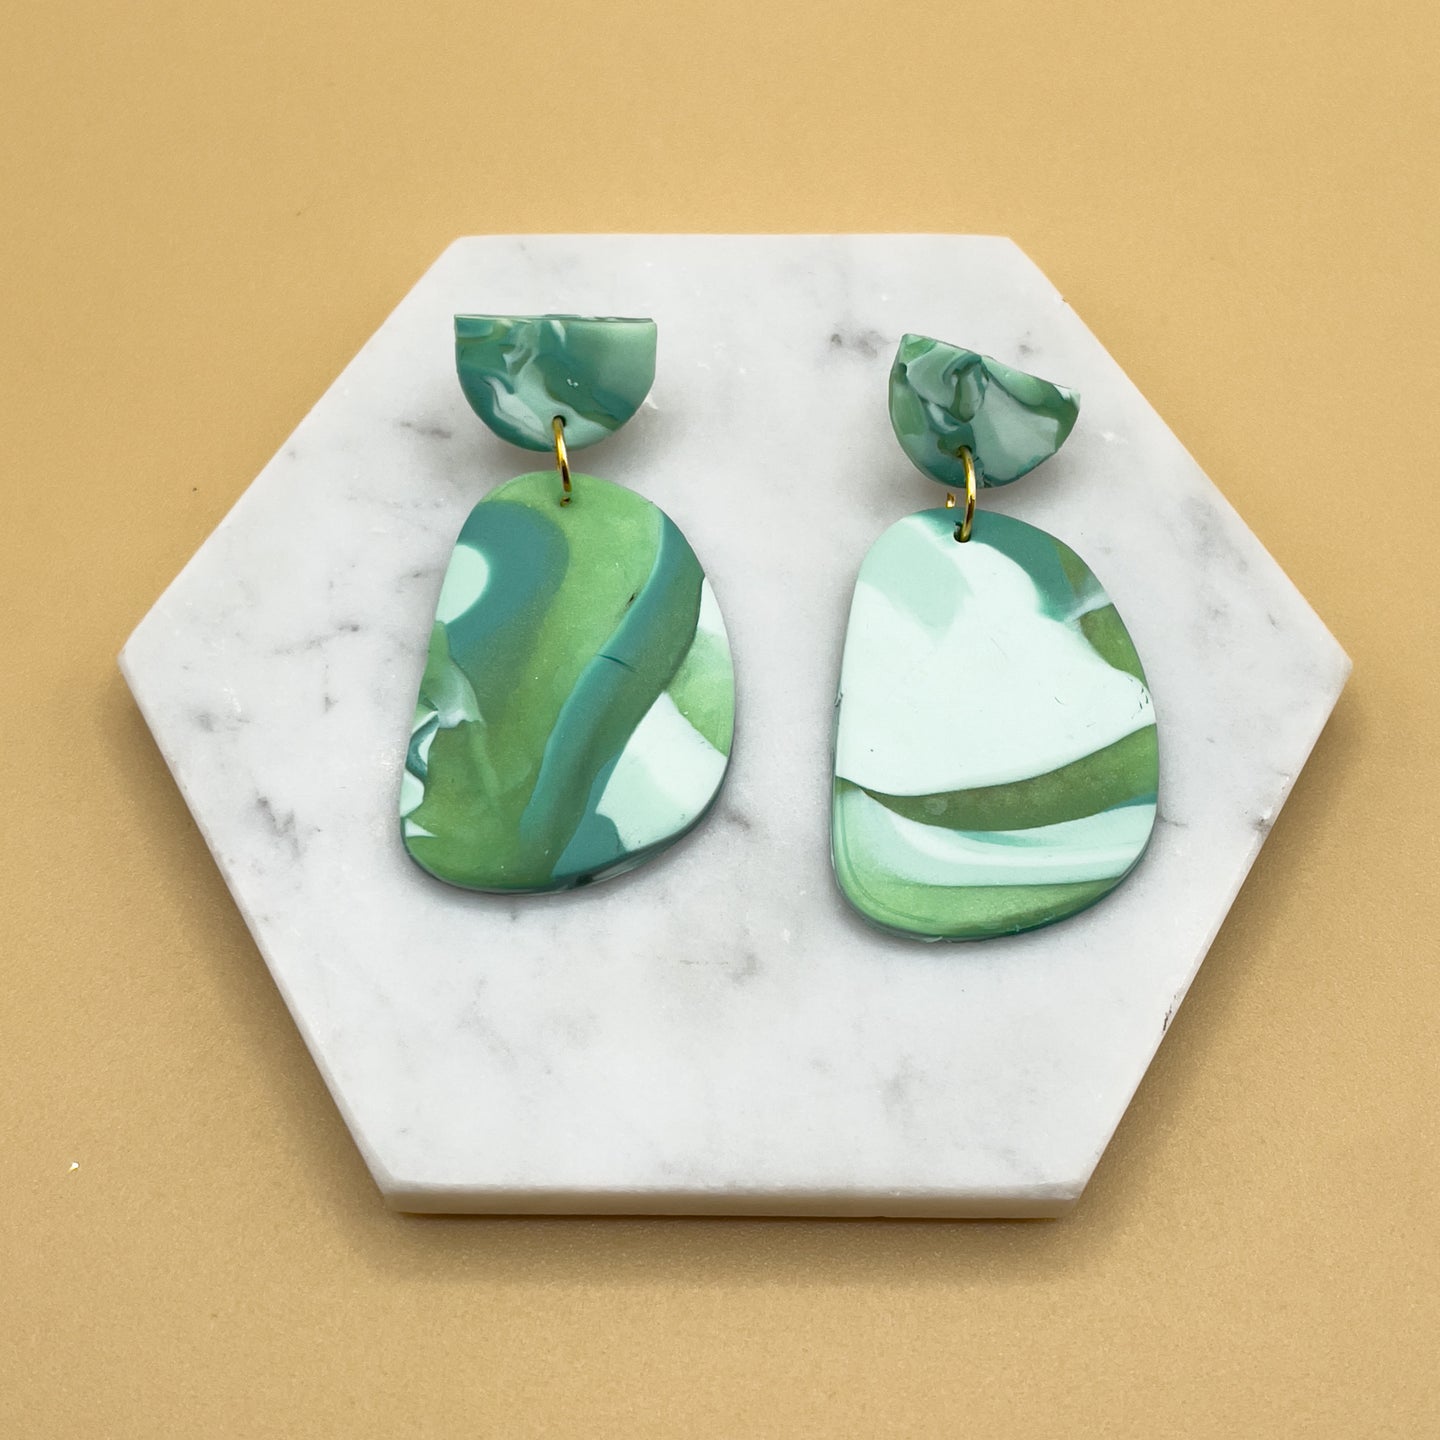 Over the Moon Earrings - Green Marble